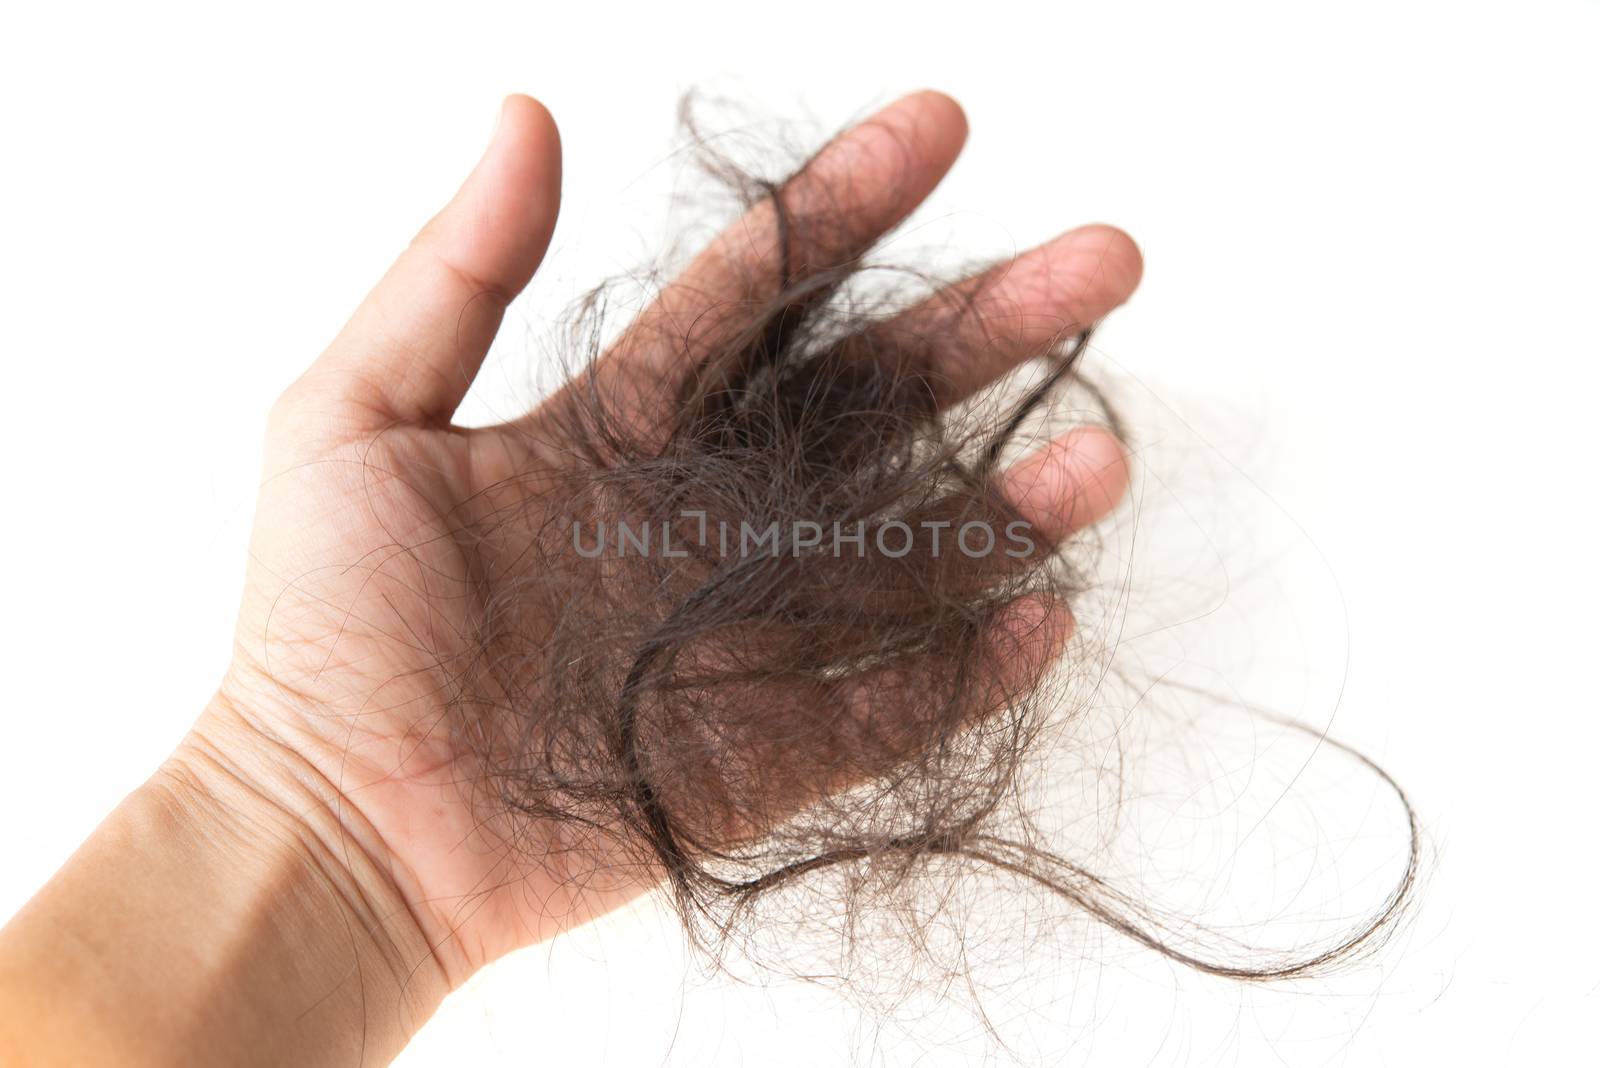 Human hand with lost hair on it, isolated on white background.